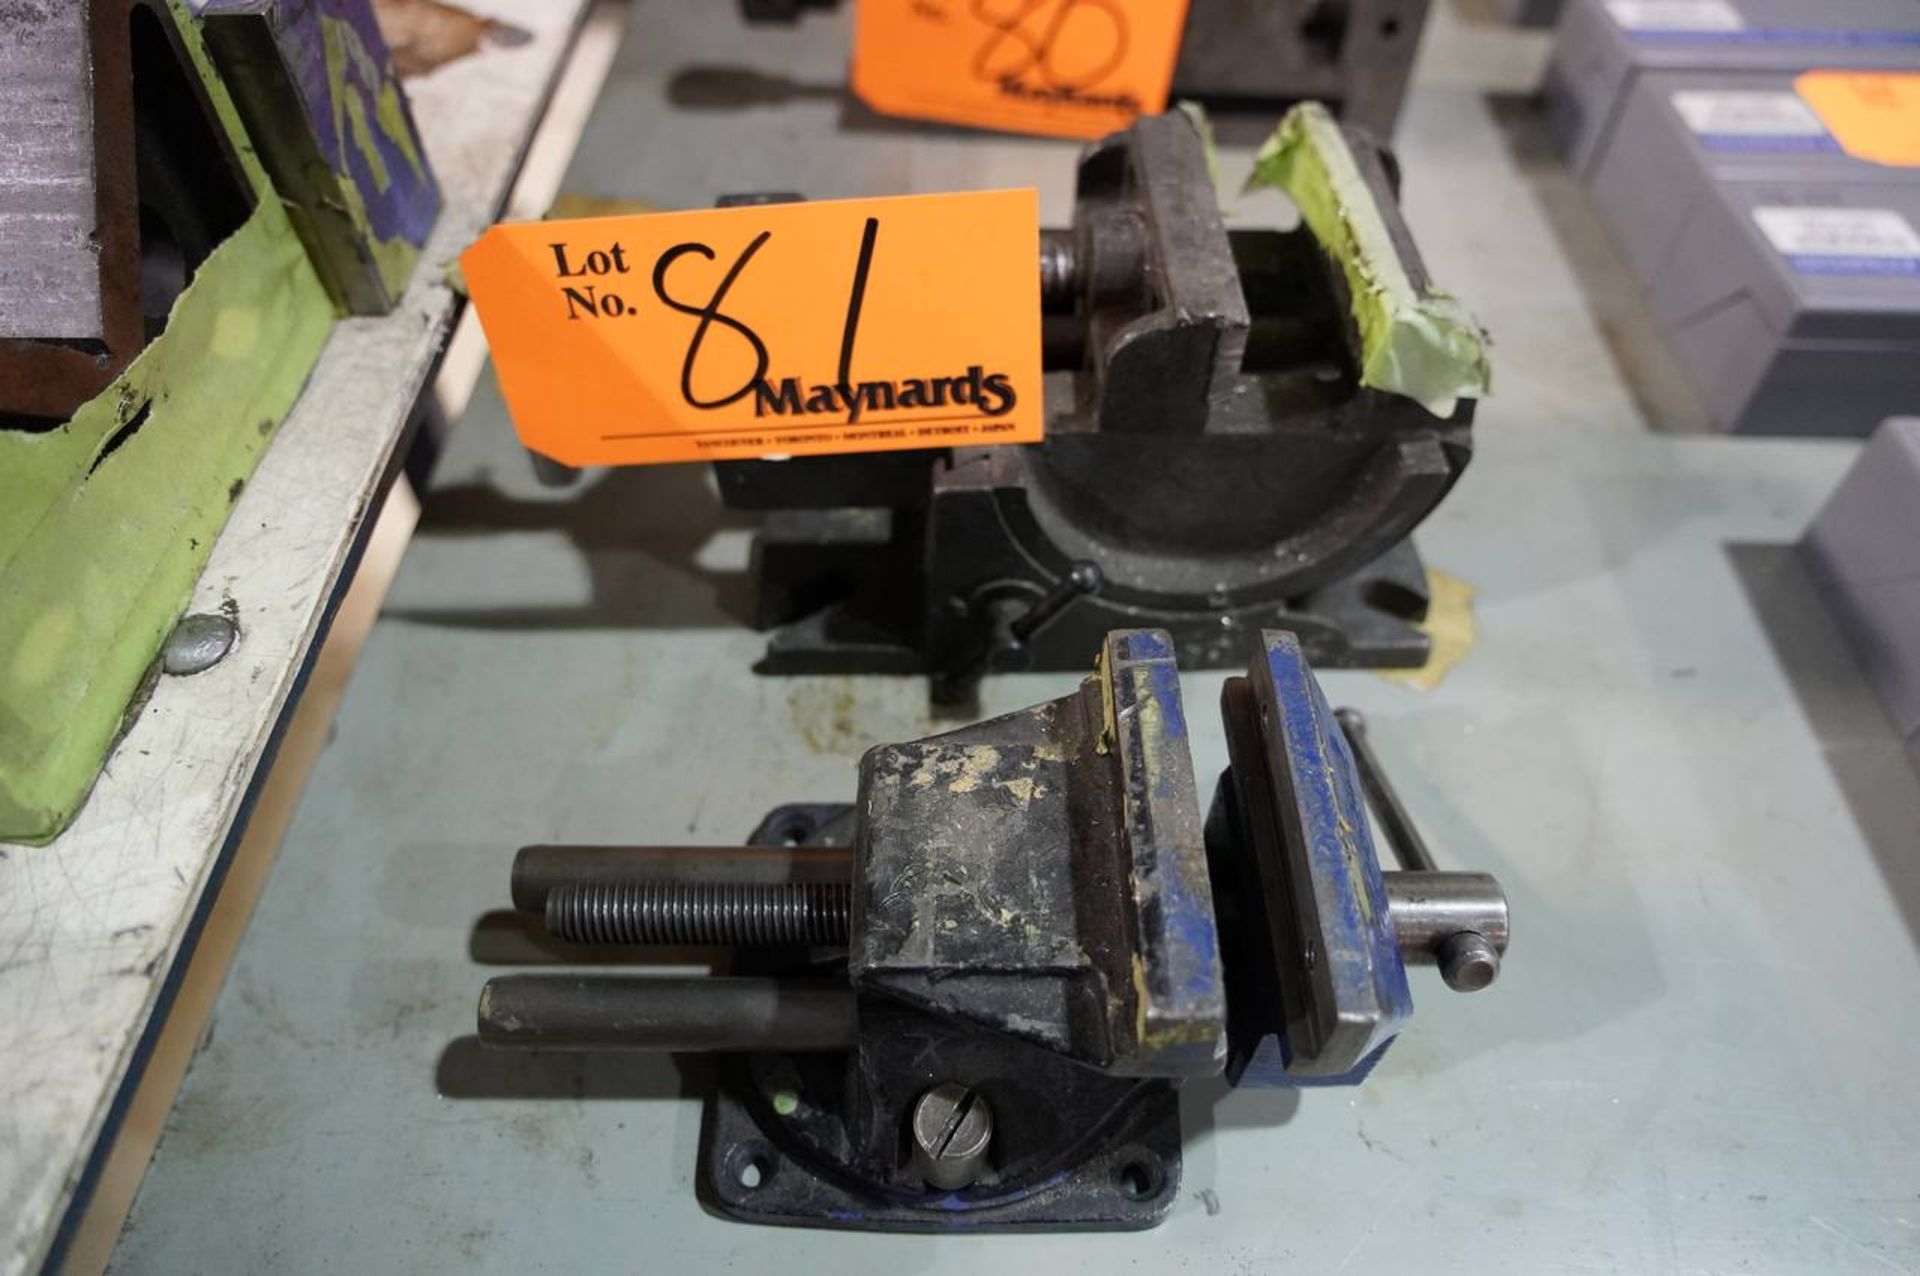 Record 4 '' Combination Vise and 3 1/2'' Bench Top Vise